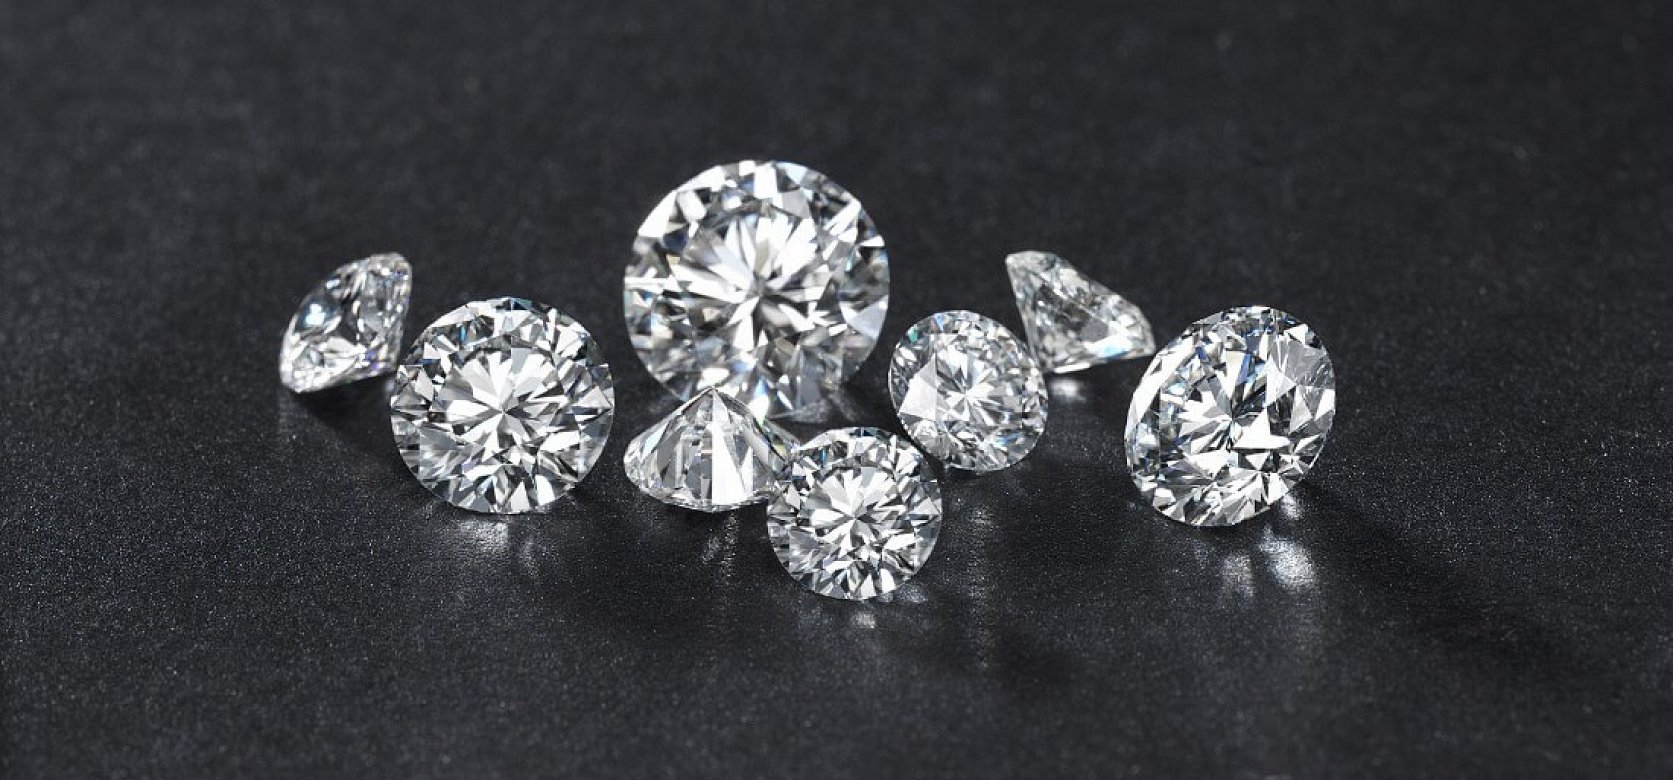 Loose Diamonds And Ways To Use It